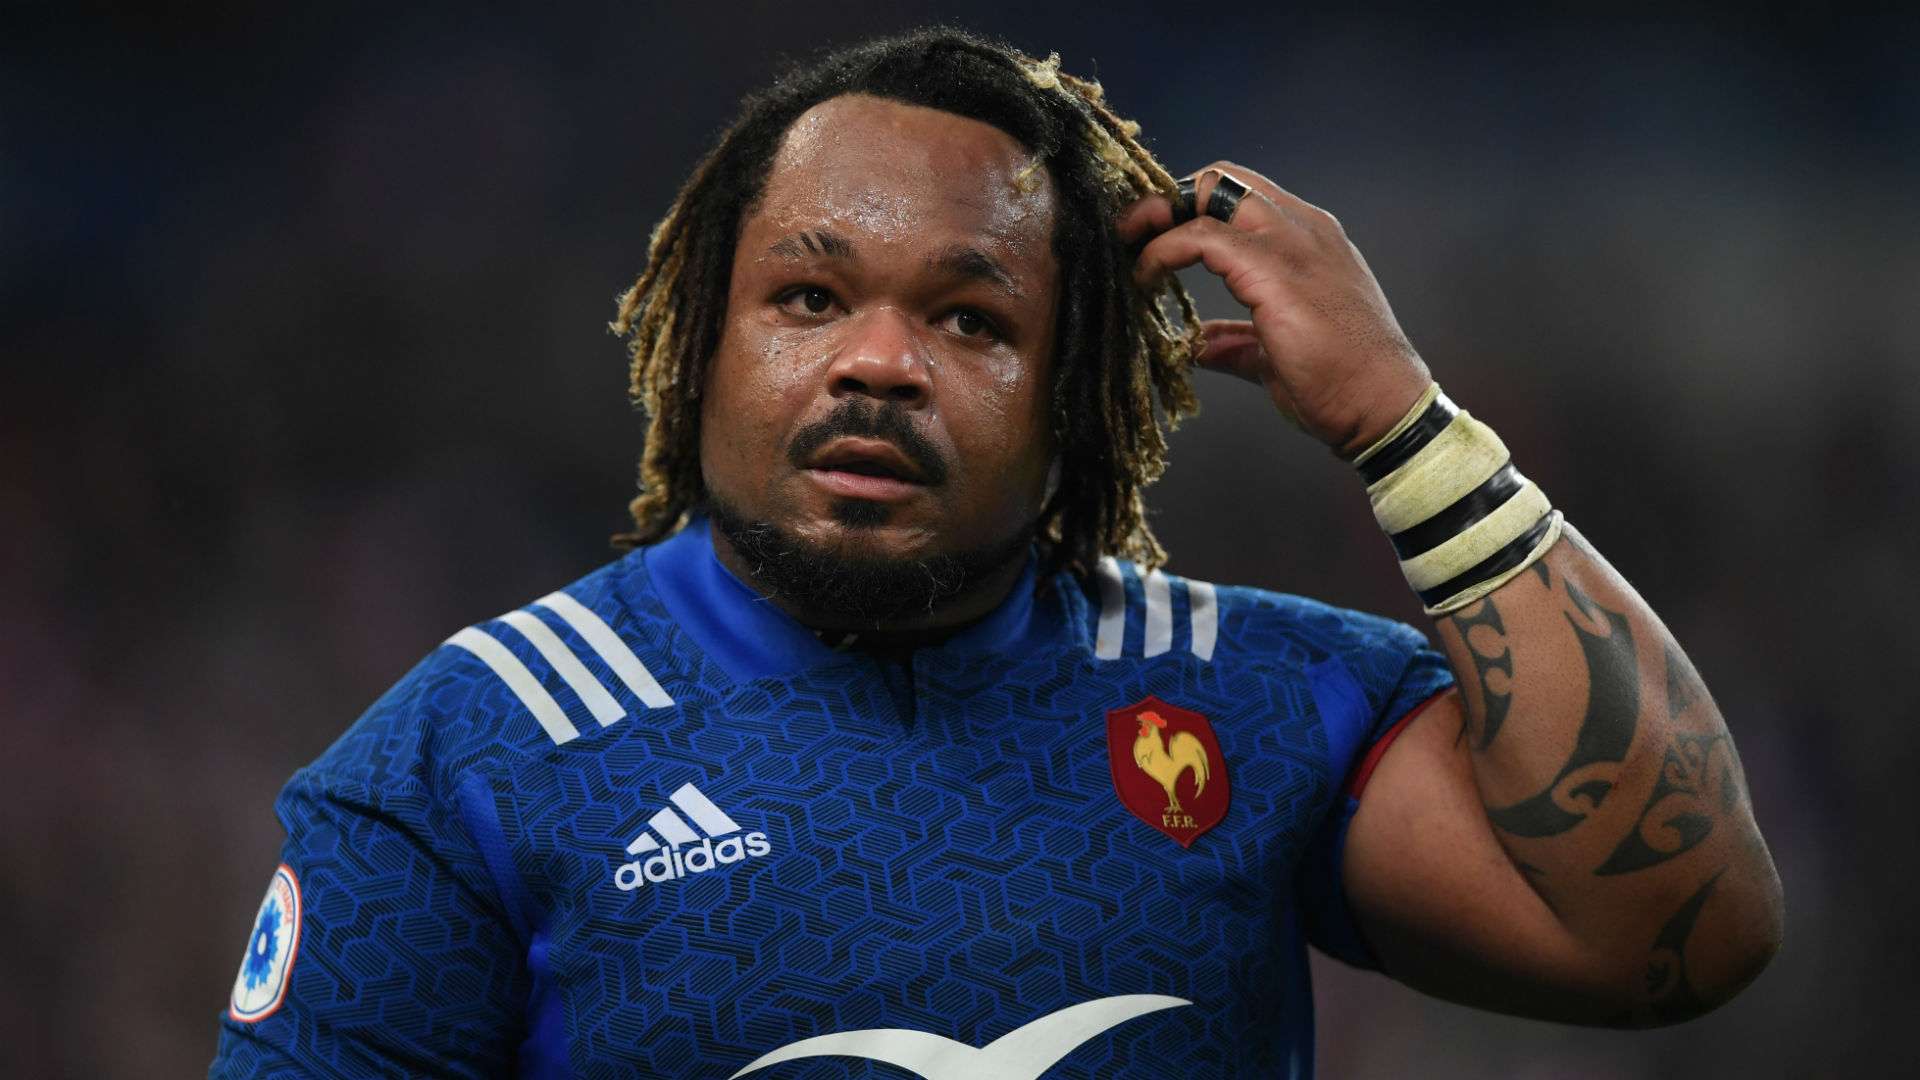 France will head to the 2019 Rugby World Cup without Mathieu Bastareaud after their Six Nations vice-captain was left out of a 31-man squad.